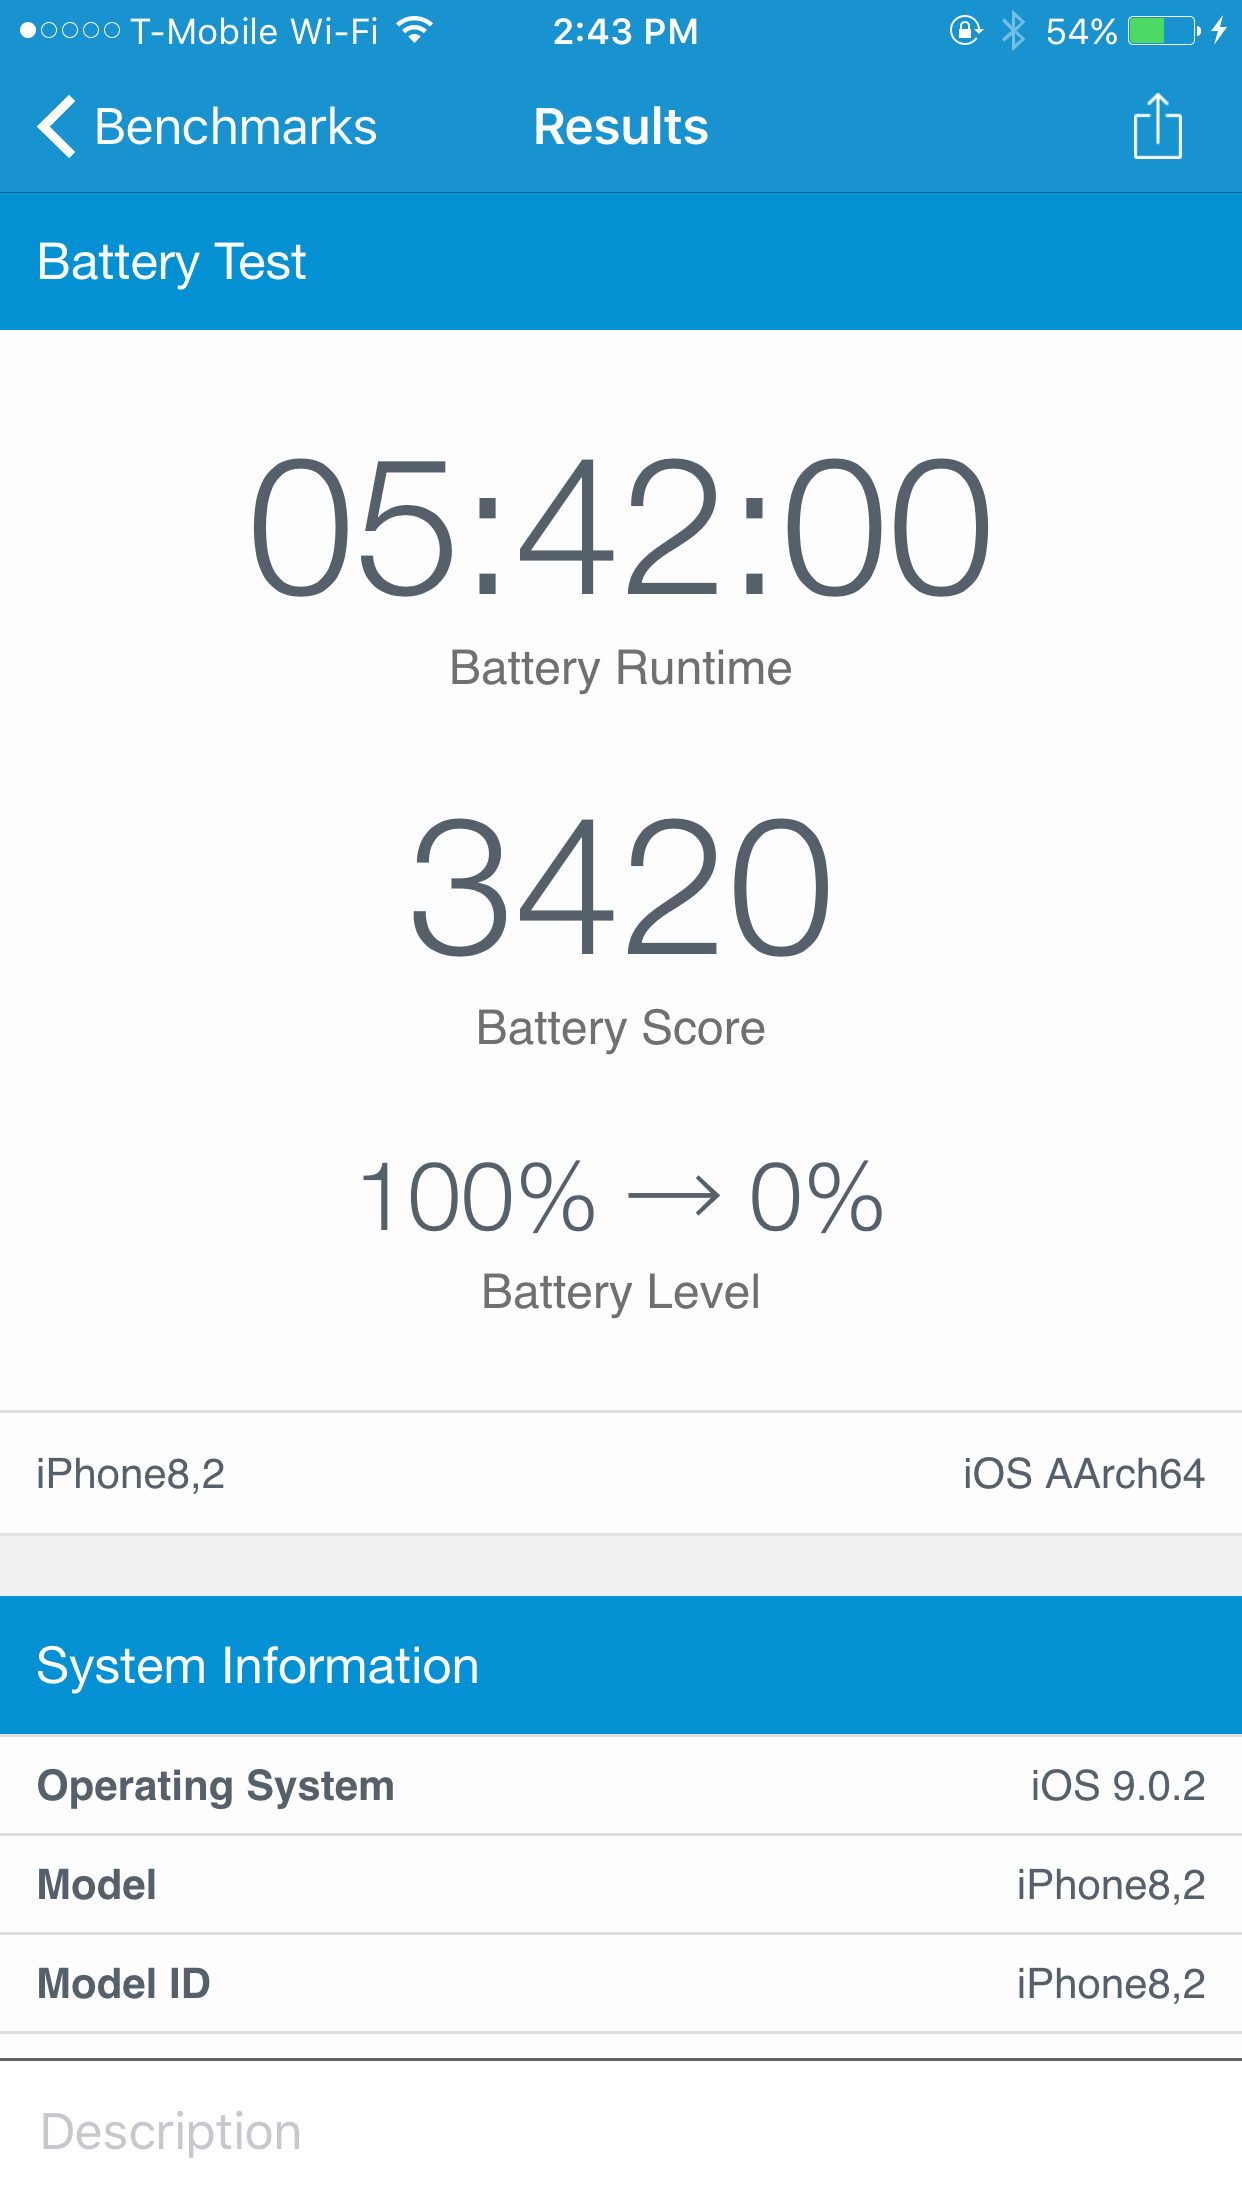 iPhone 6s/6s Plus battery test results only | MacRumors Forums